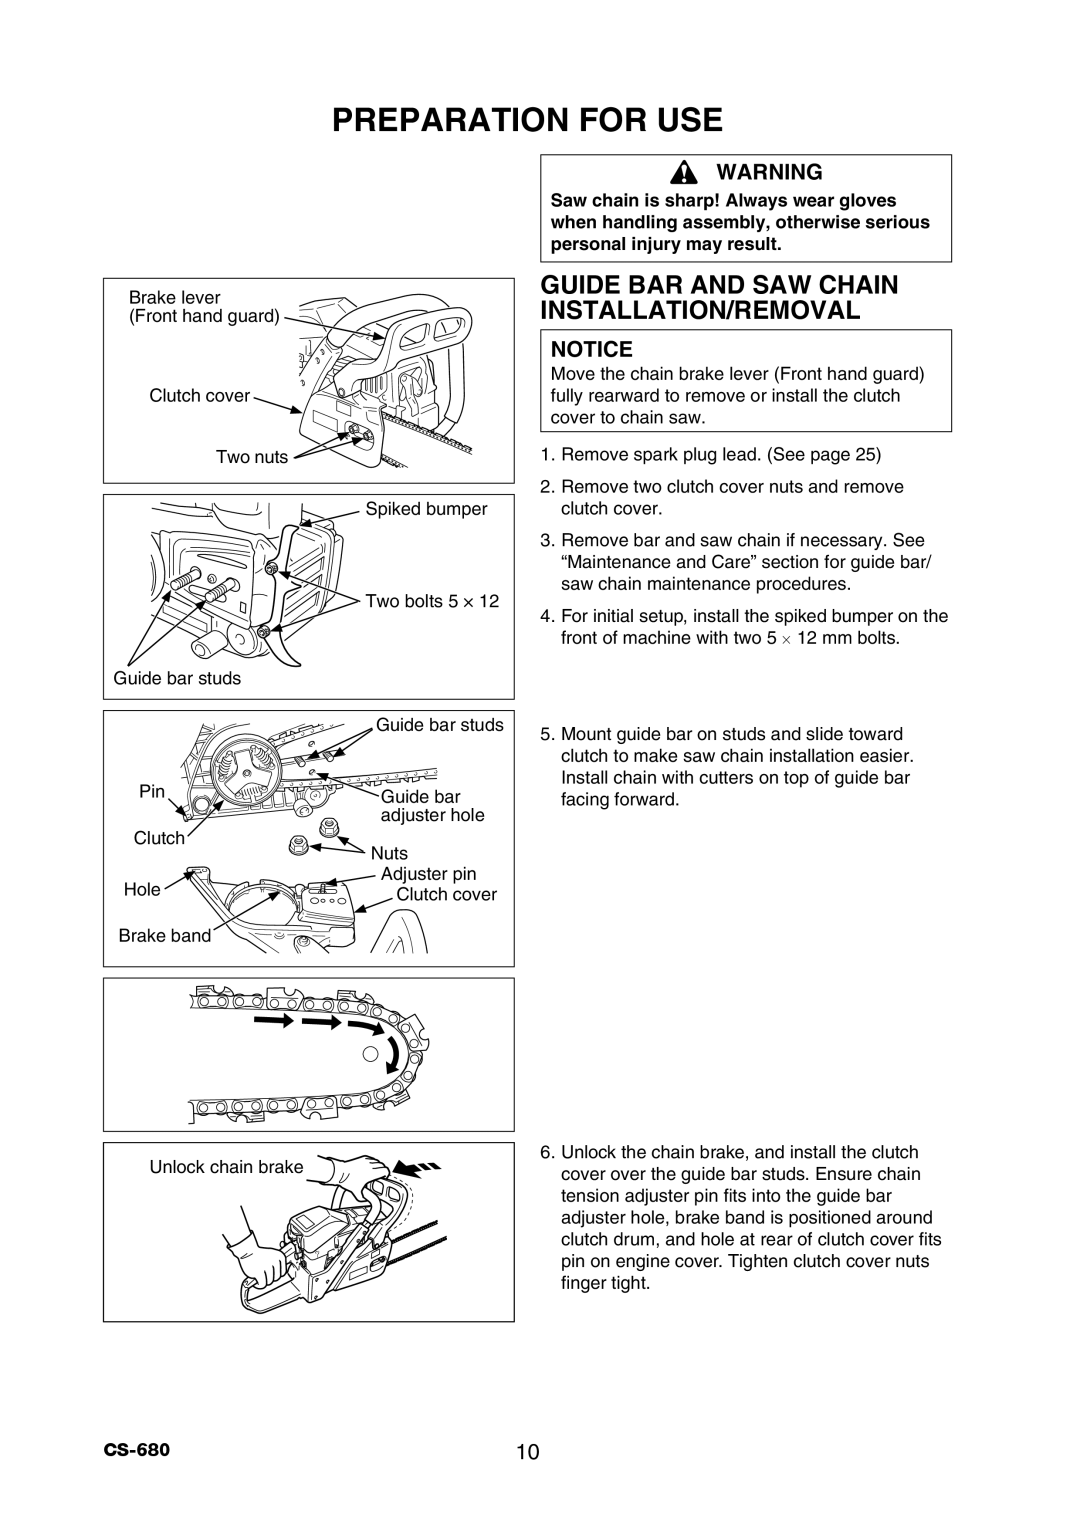 Echo CS-680 instruction manual Preparation For Use, Guide Bar And Saw Chain Installation/Removal 